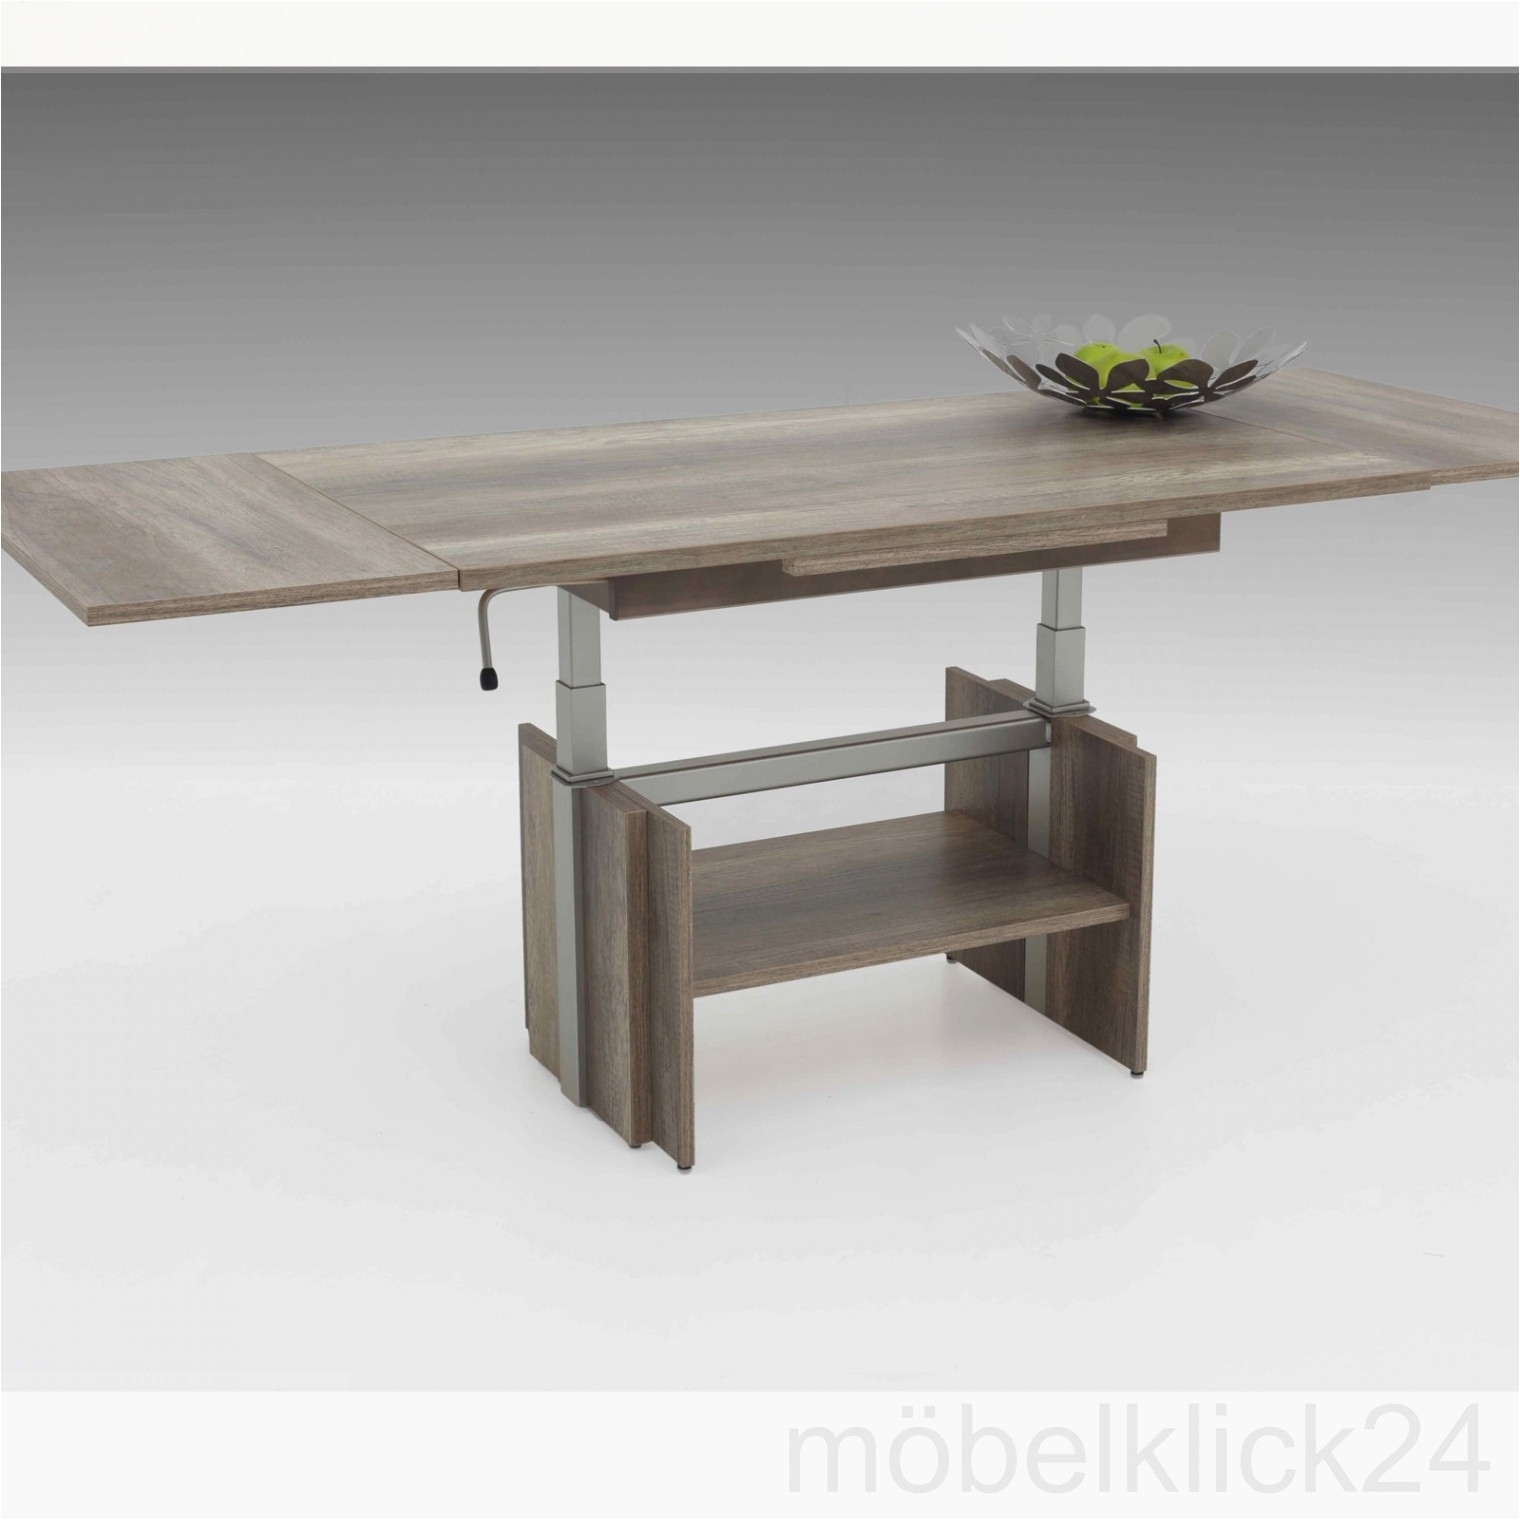 gray reclaimed wood coffee table Collection Glass Rectangle Coffee Table New Home Design Trendy Kaffetisch